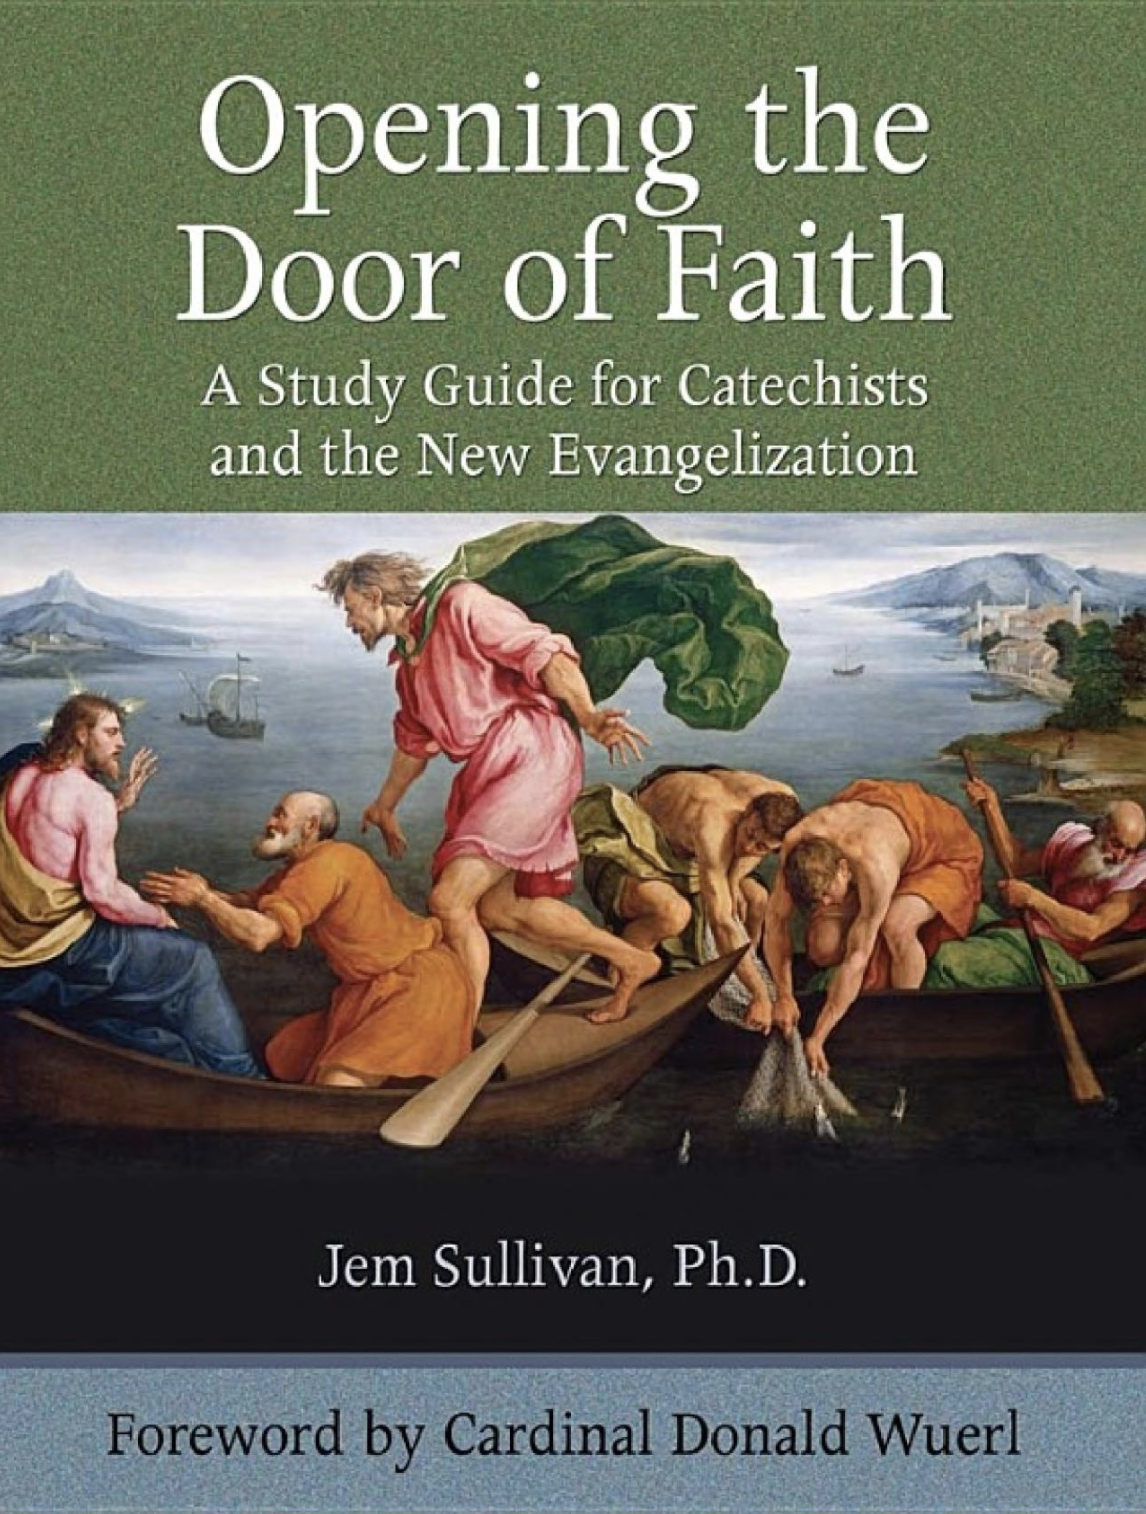 Opening the Door of Faith book cover